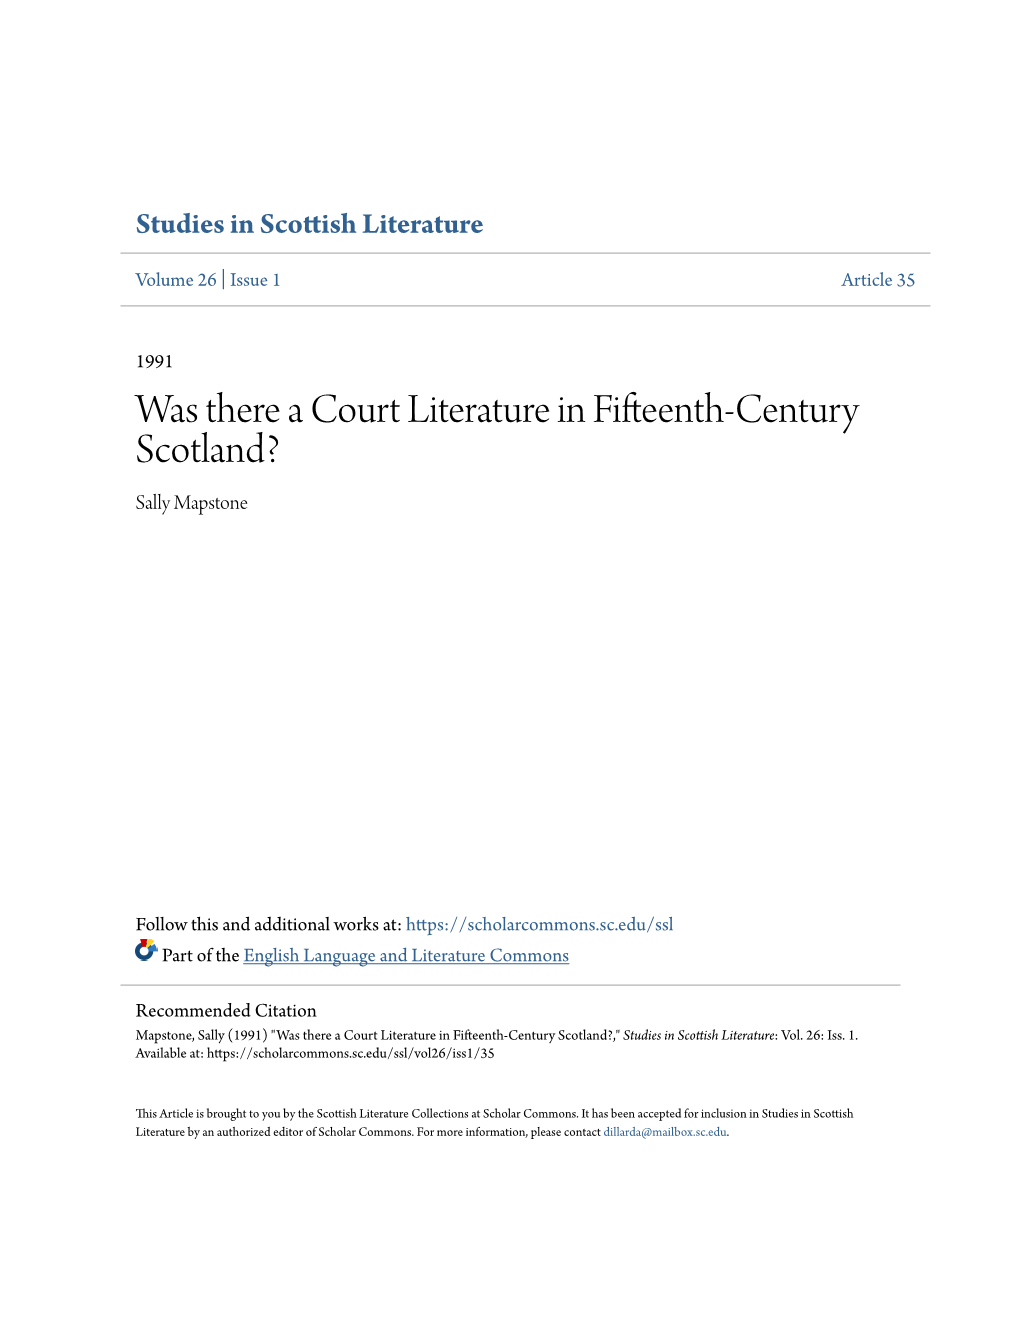 Was There a Court Literature in Fifteenth-Century Scotland? Sally Mapstone